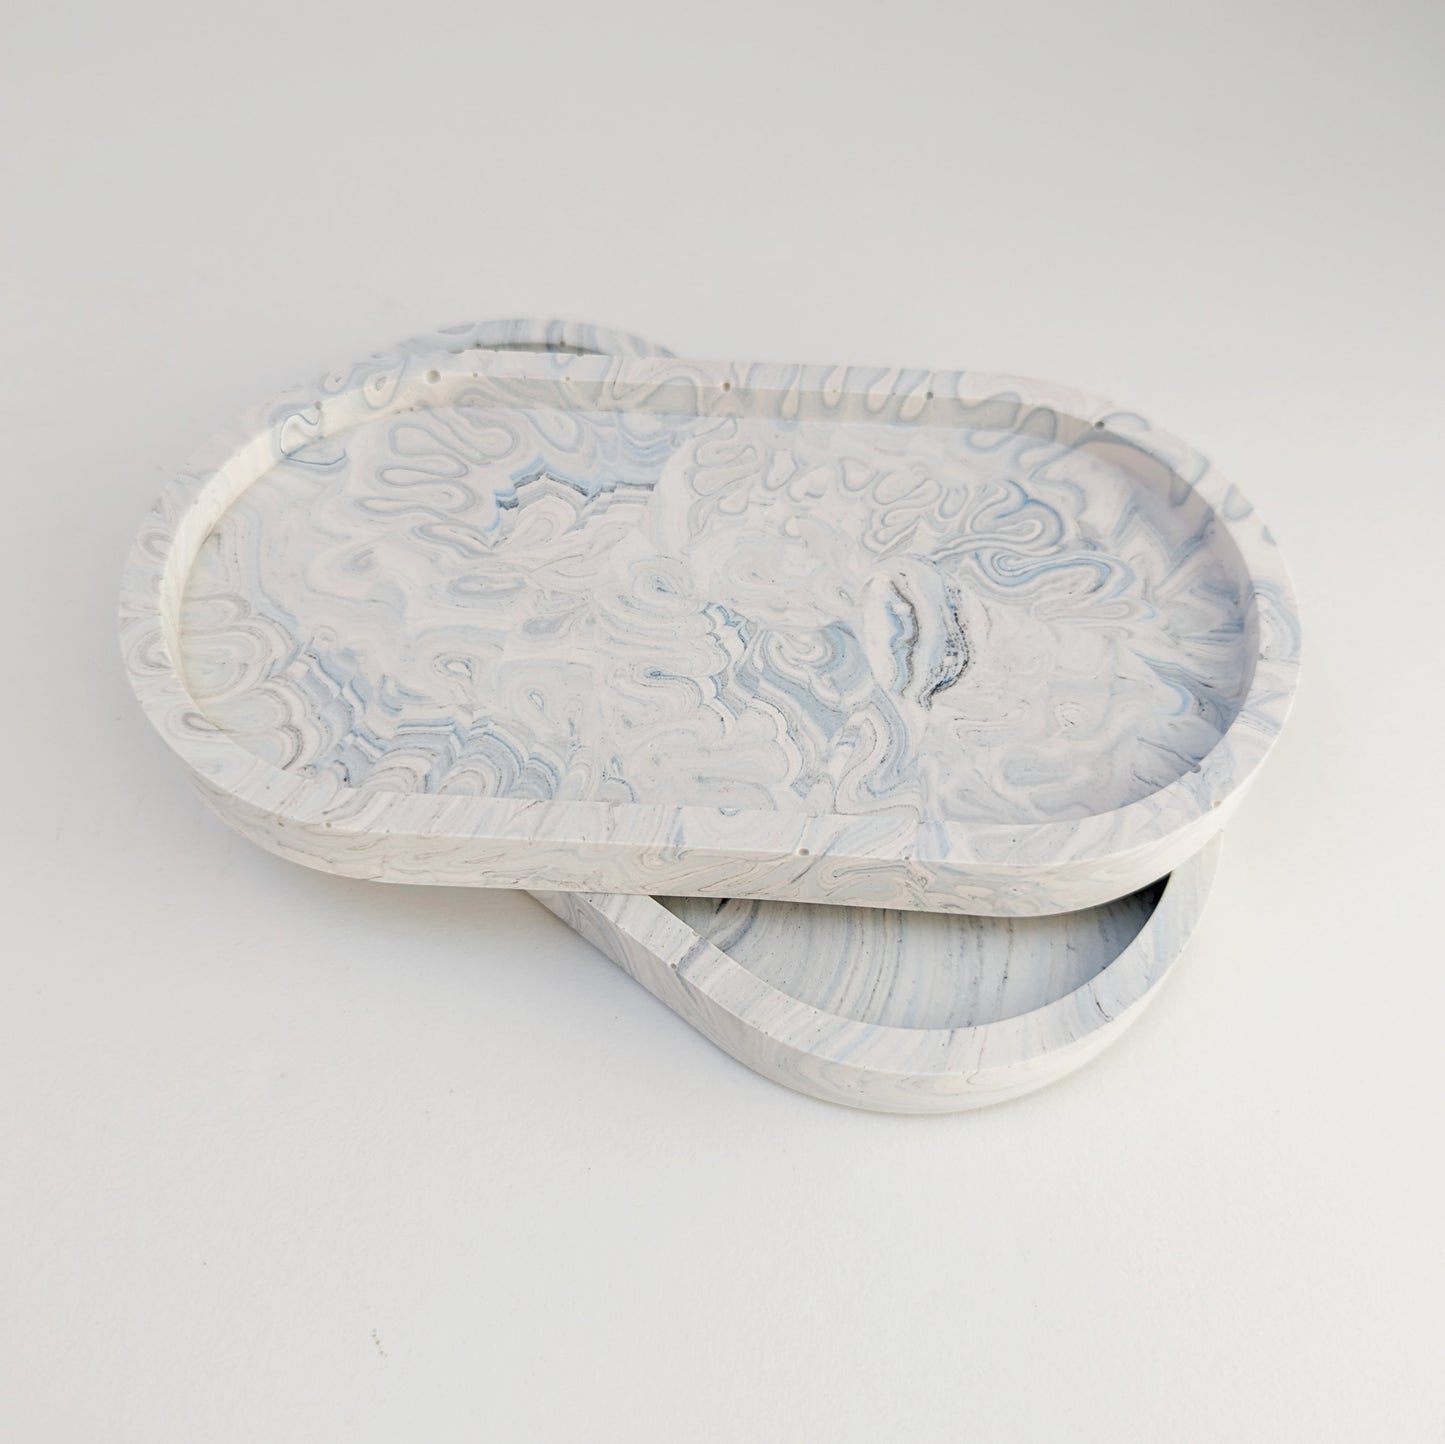 Black, Blue & White Marbled Small Tray